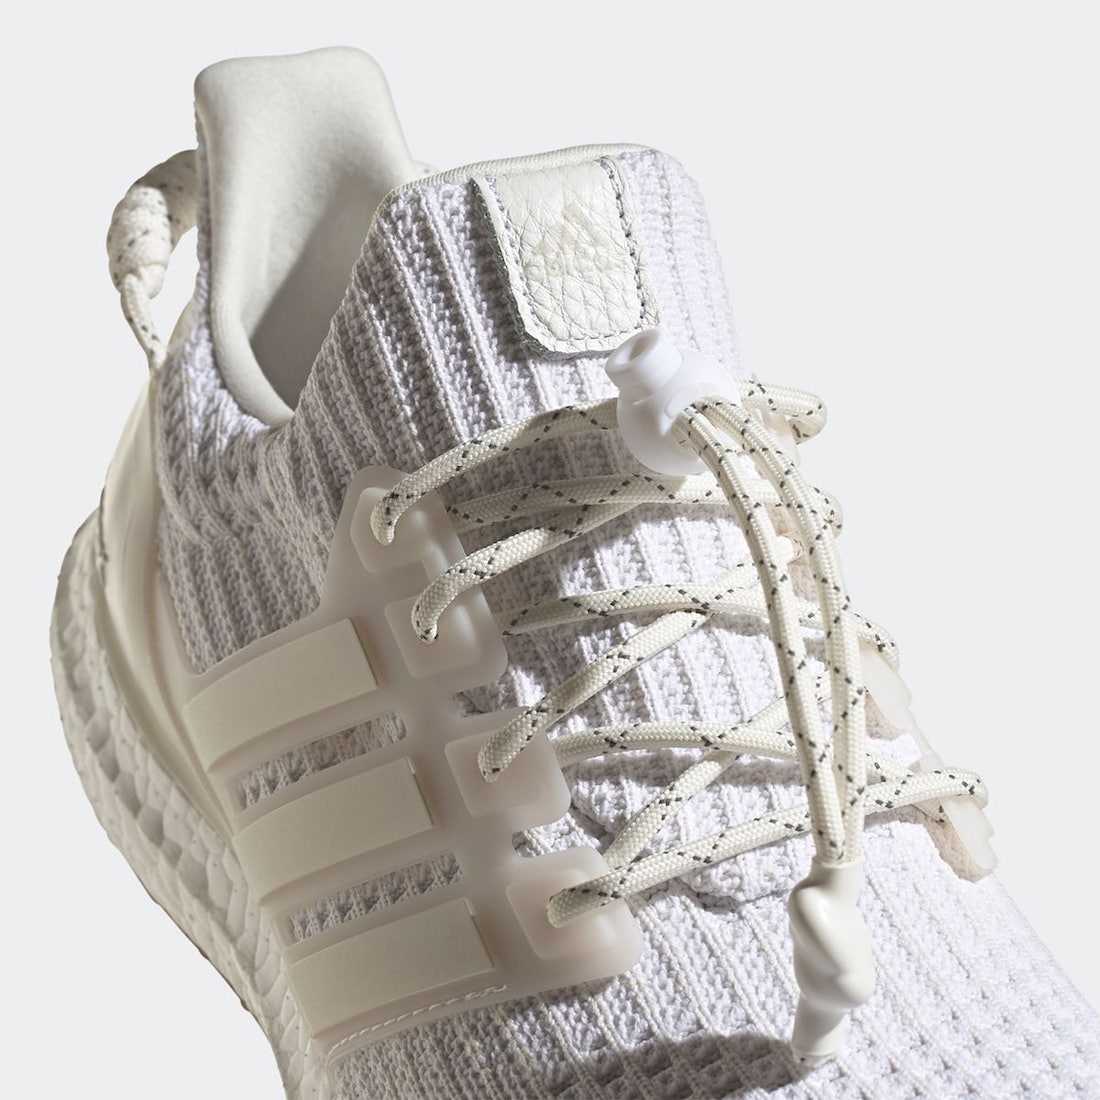 Beyonce Ivy Park adidas Ultra Boost White Gum GX2770 Release Date Info